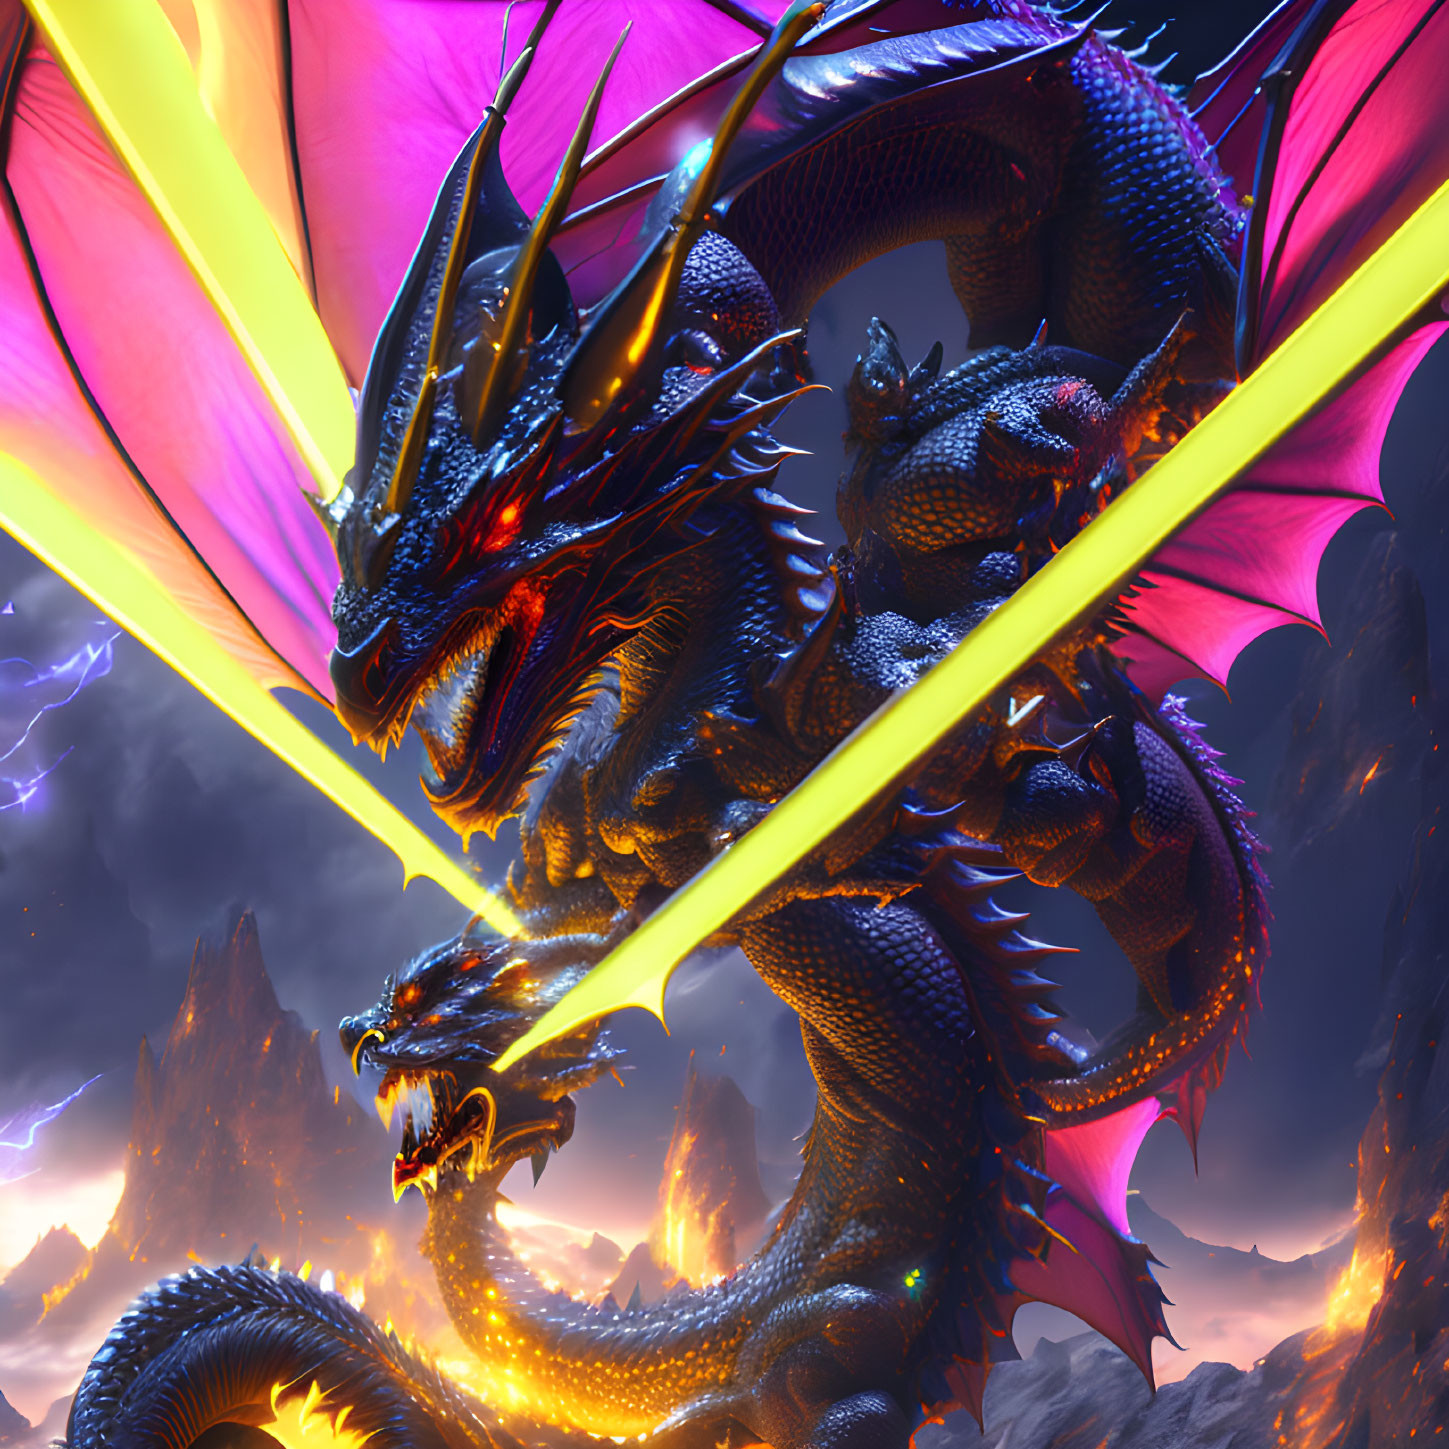 Majestic multi-headed dragon with glowing eyes and pink wings on rocky terrain under purple sky